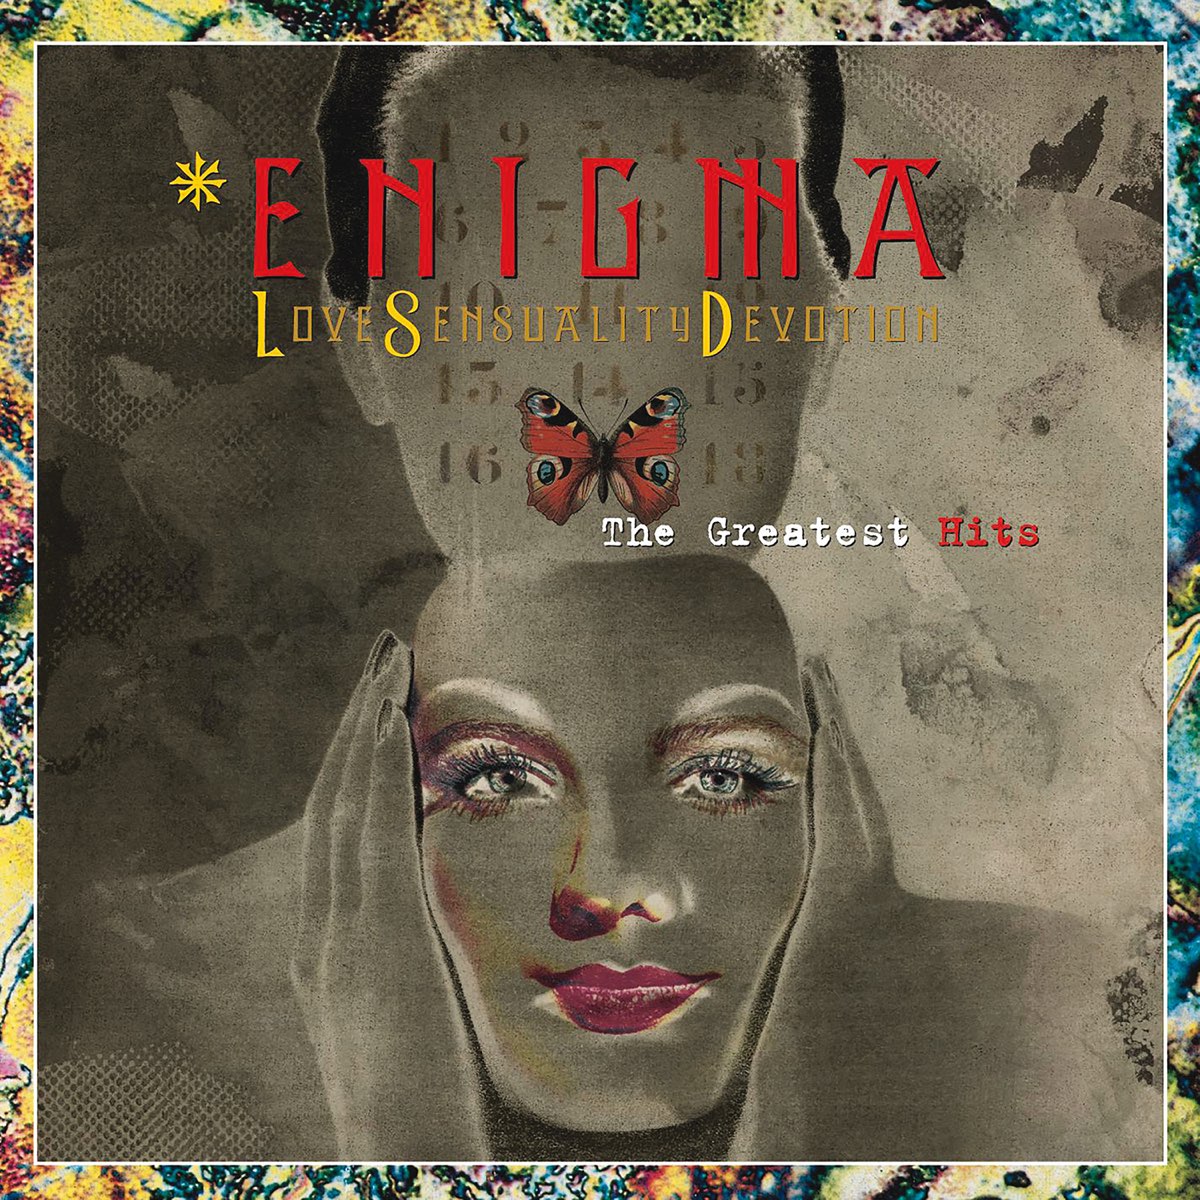 ‎love Sensuality Devotion The Greatest Hits By Enigma On Apple Music